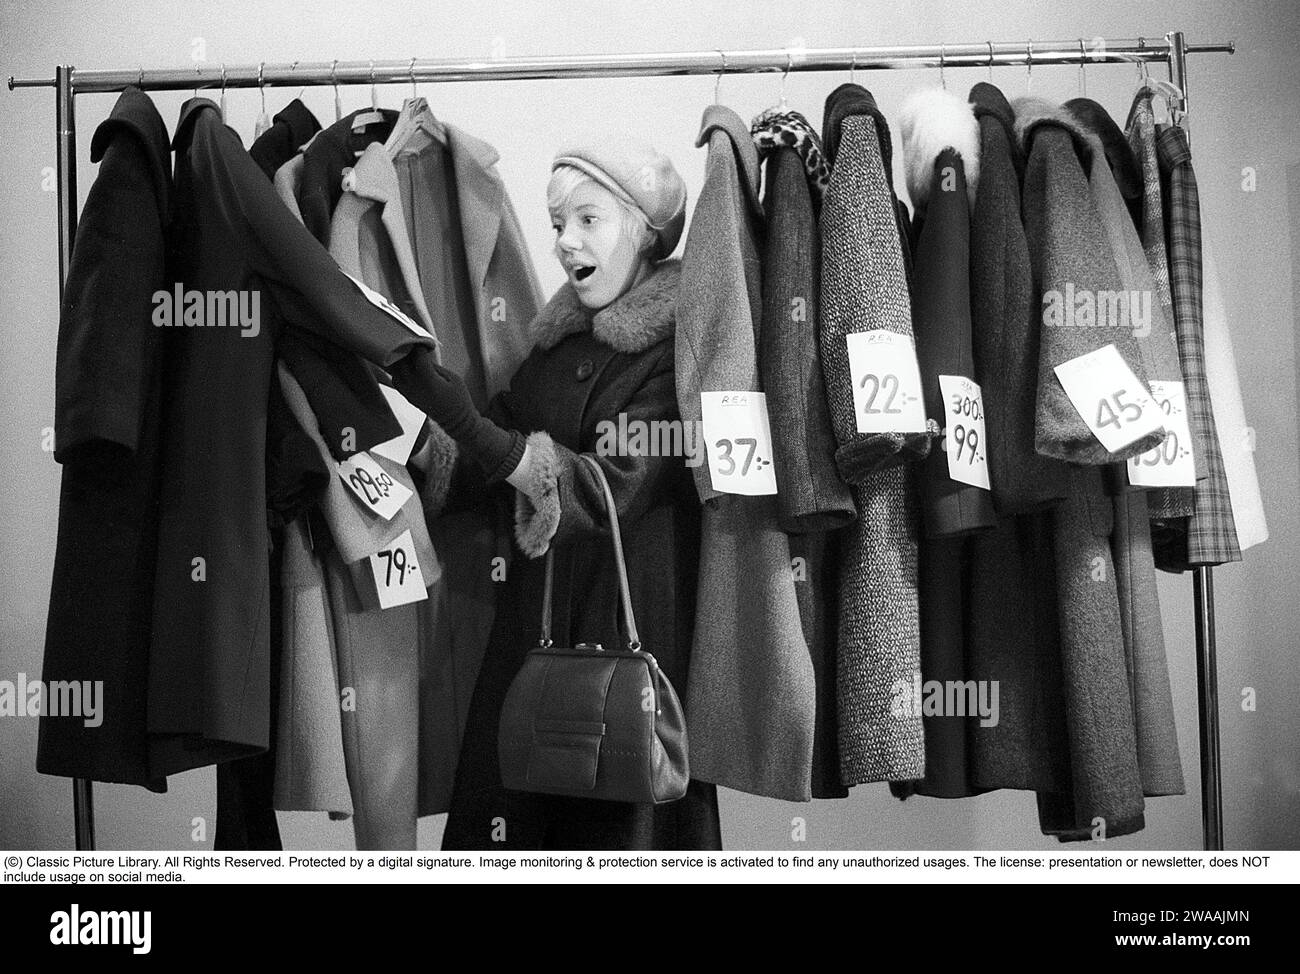 Great discounts of outerwear in the 1960s. A woman stands by a clothes rack, choosing from outerwear and coats marked with price tags with discounted prices. Judging by her face, she appreciates the reduced prices and thinks she's getting real bargains. Sweden January 1963. Ref CV28 Stock Photo